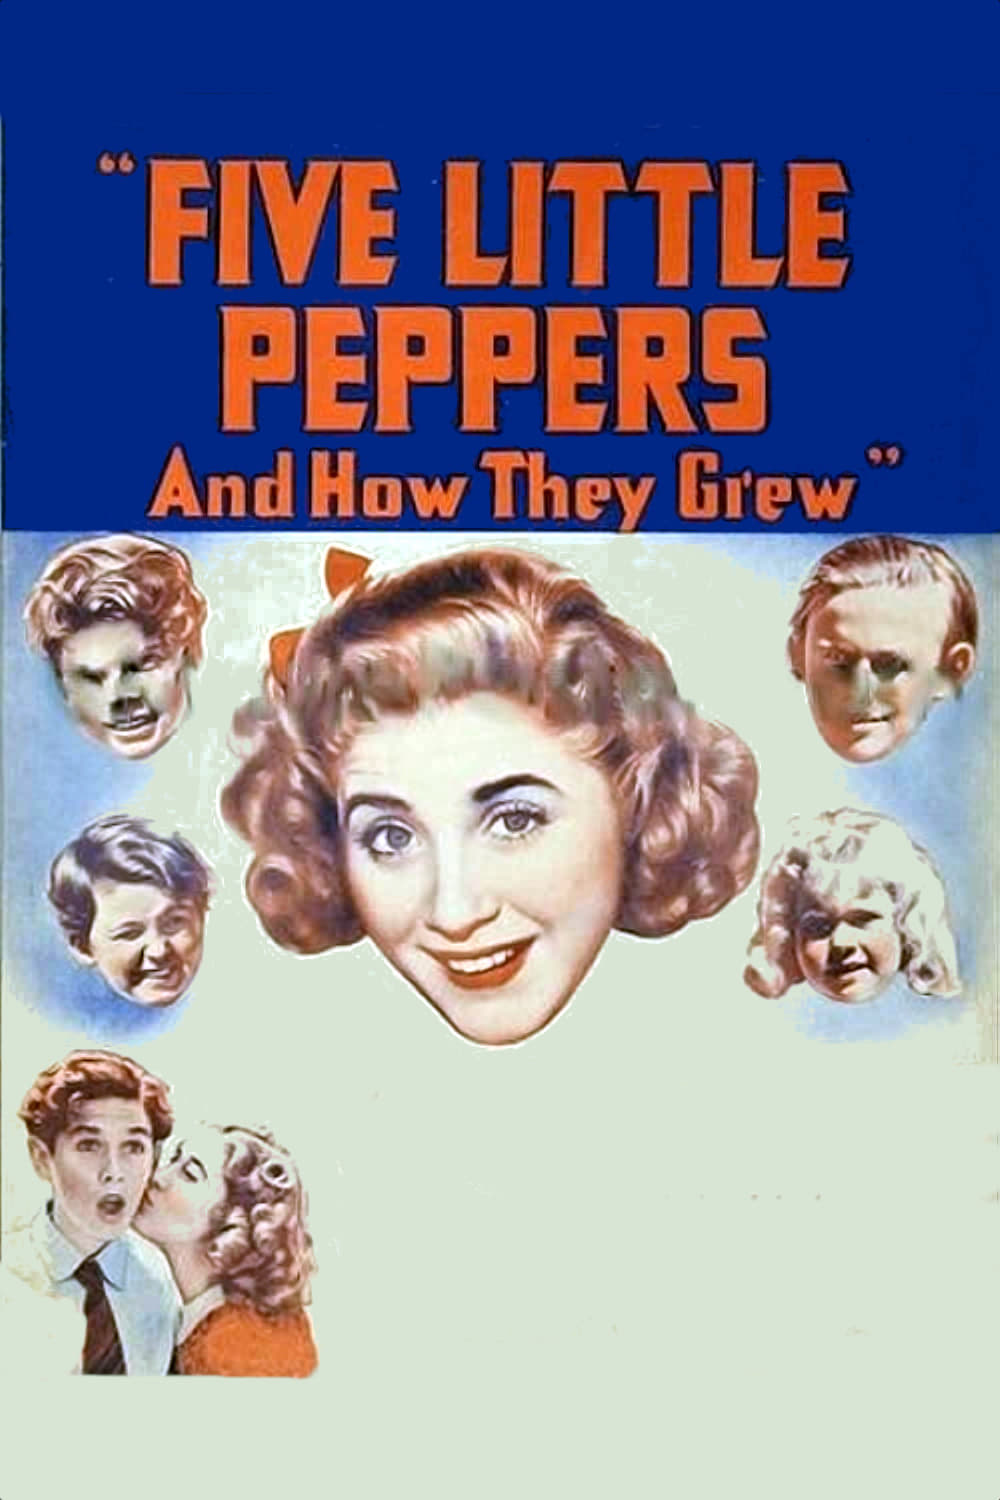 Five Little Peppers and How They Grew (1939)